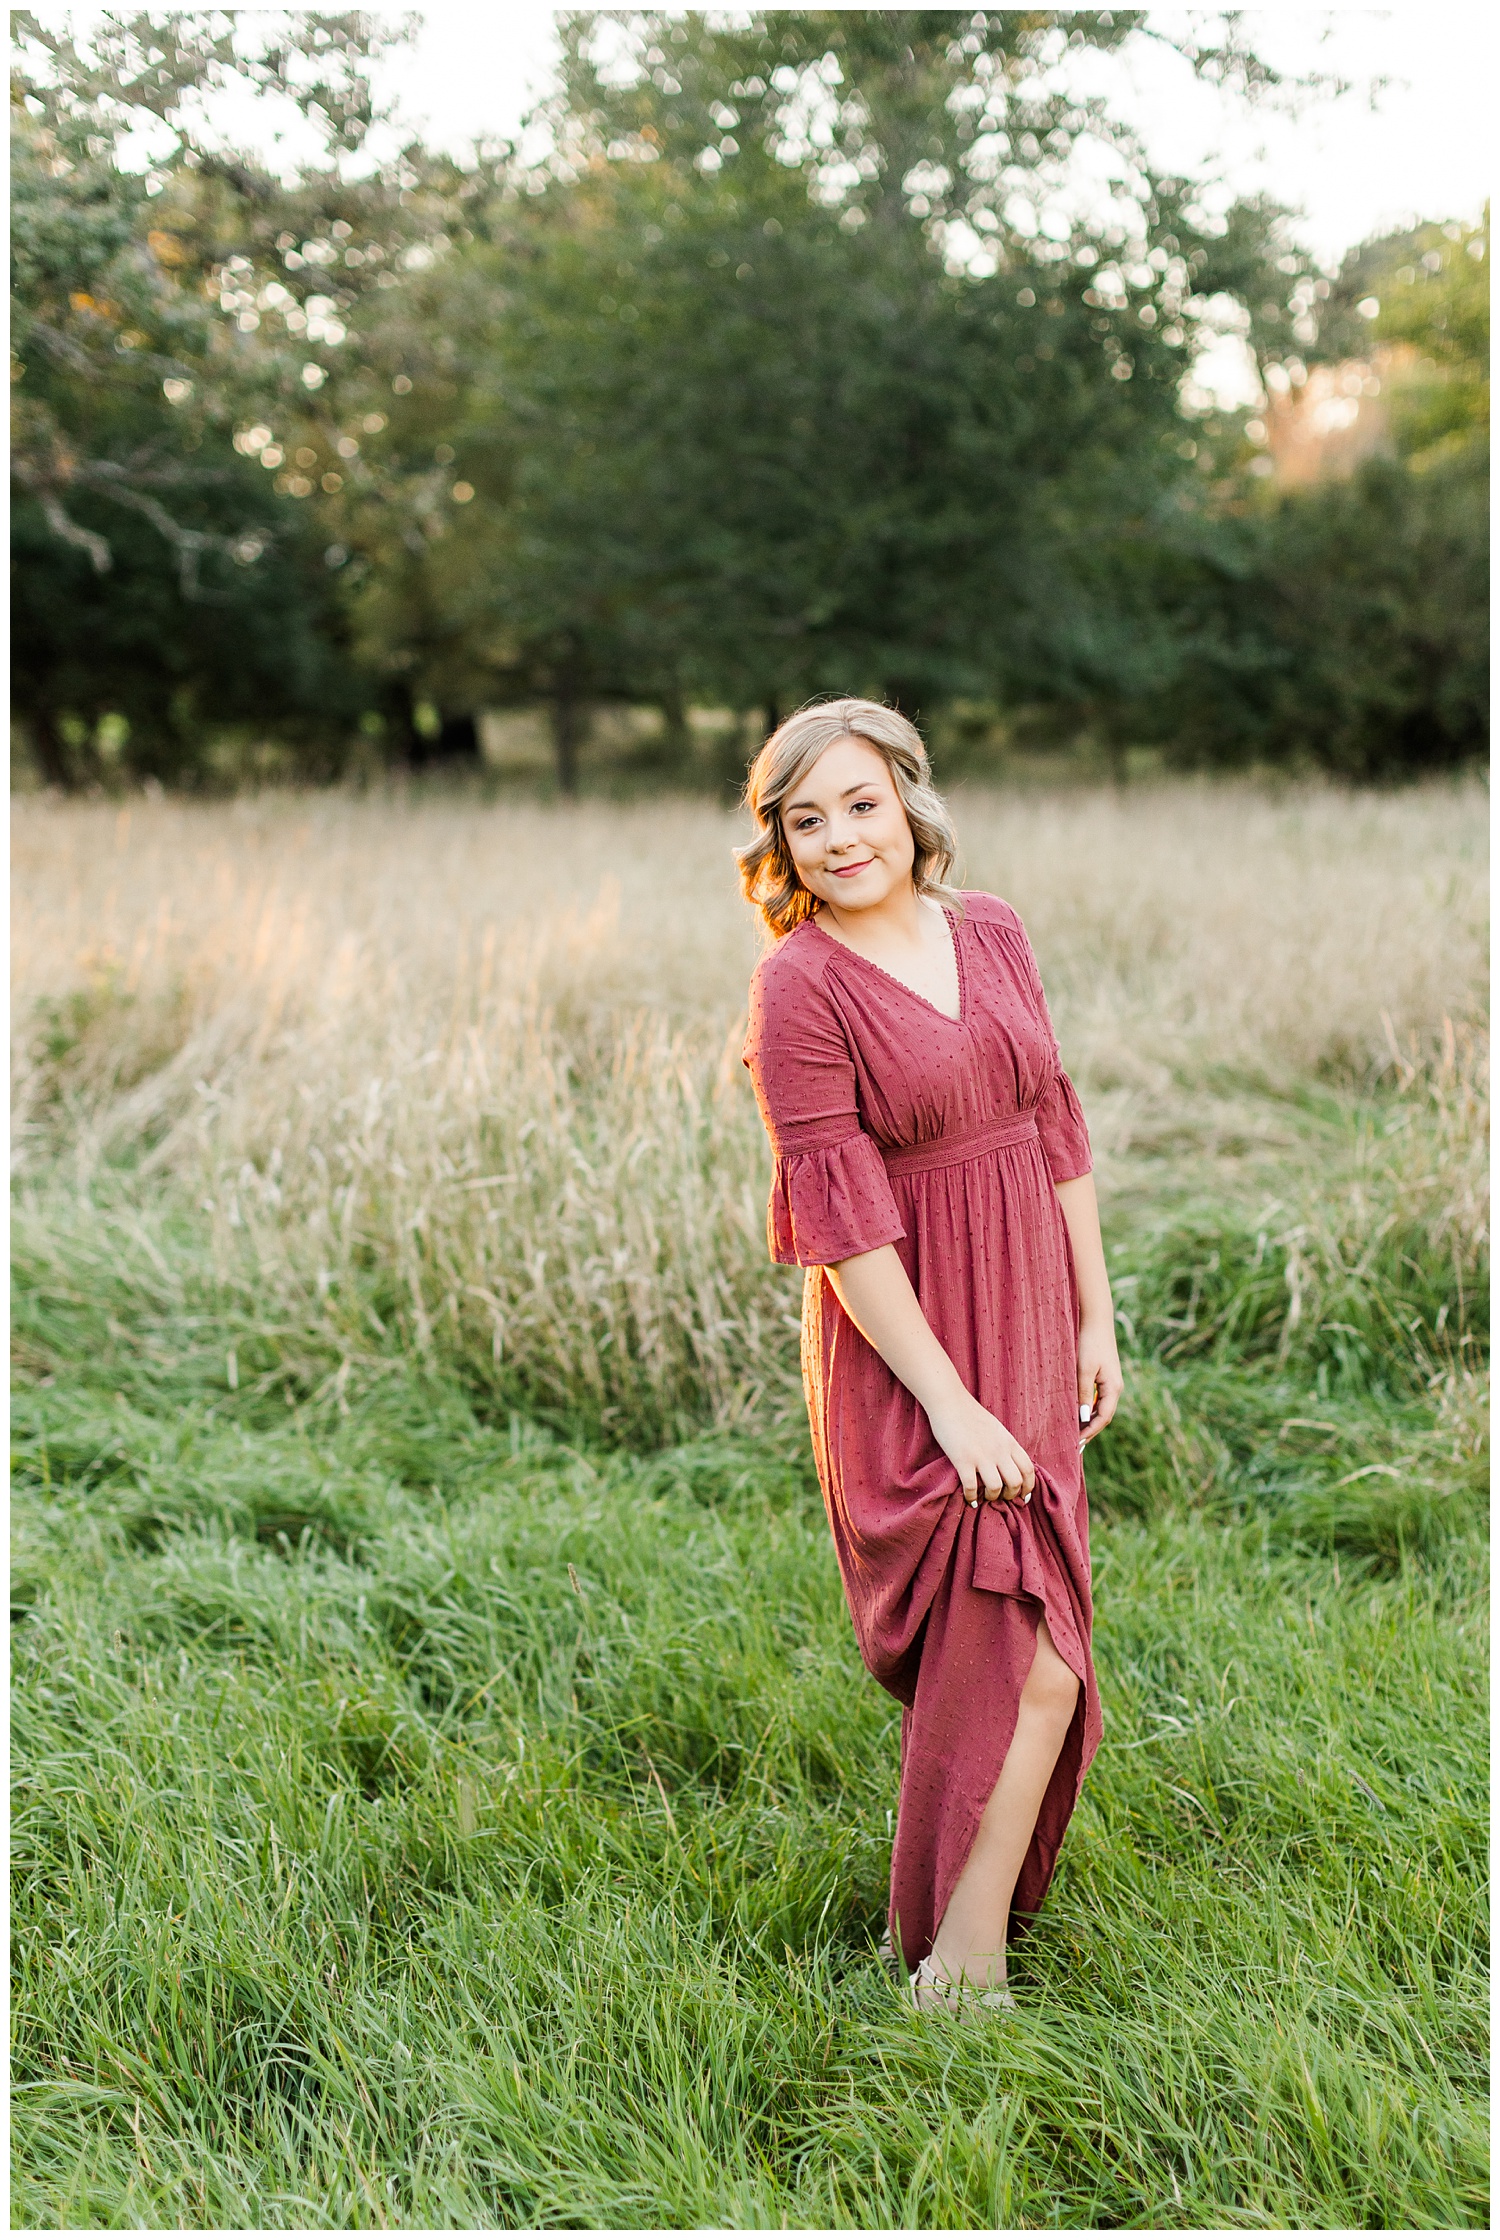 Cloey, wearing a vintage red dress, stands in a grassy pasture at golden hour | CB Studio